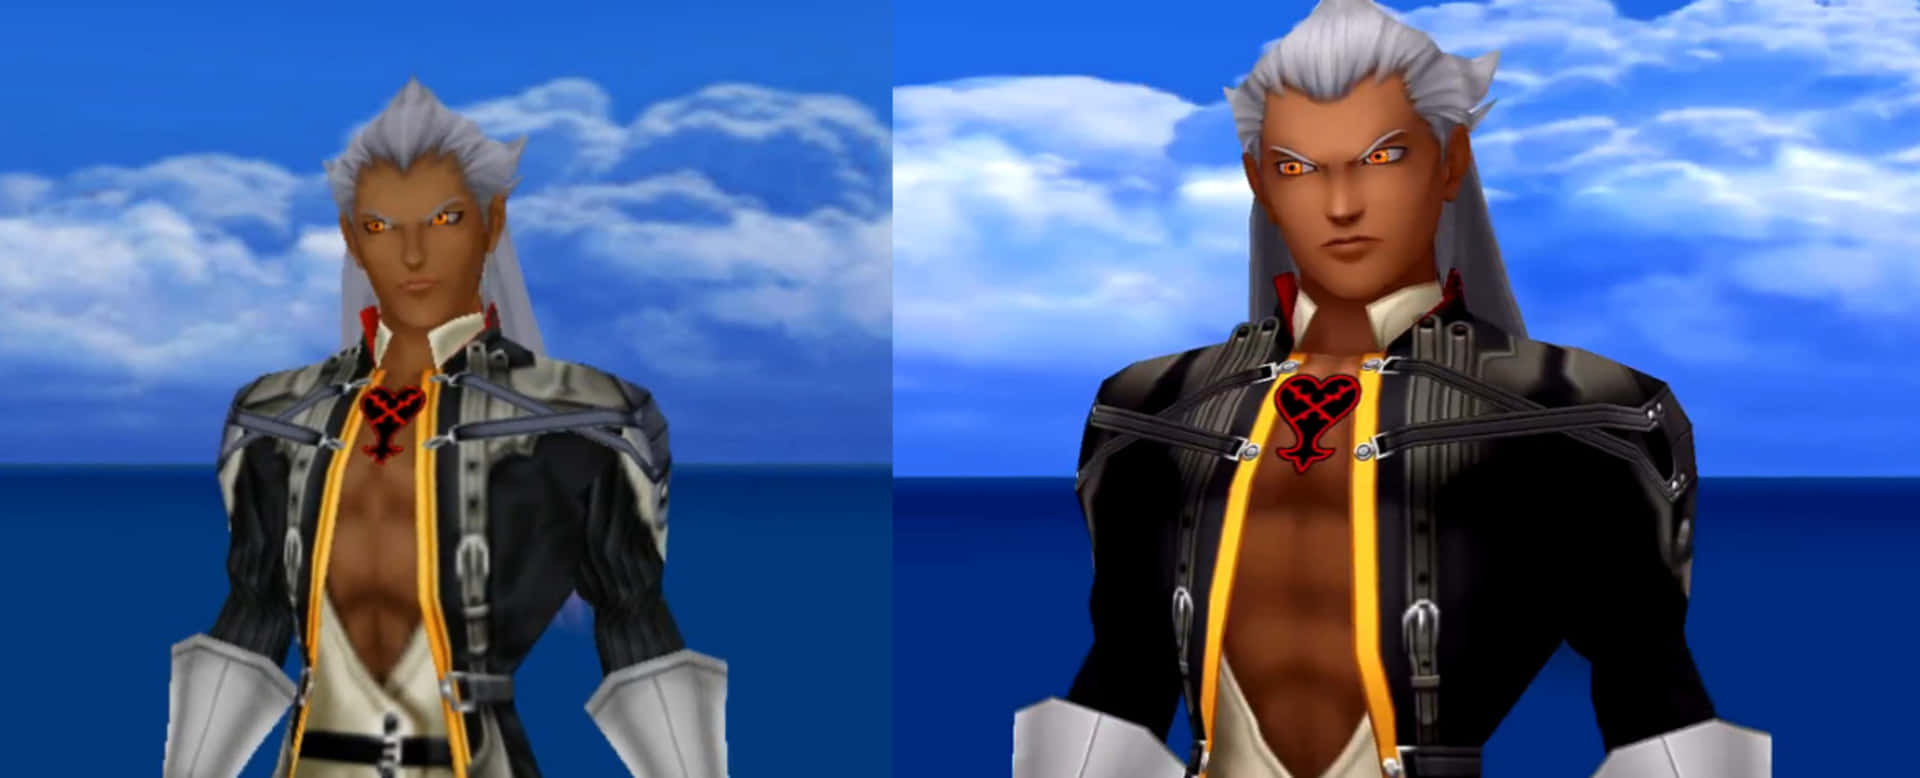 Ansem Seeker Of Darkness, the ultimate antagonist, standing against a dramatic backdrop. Wallpaper